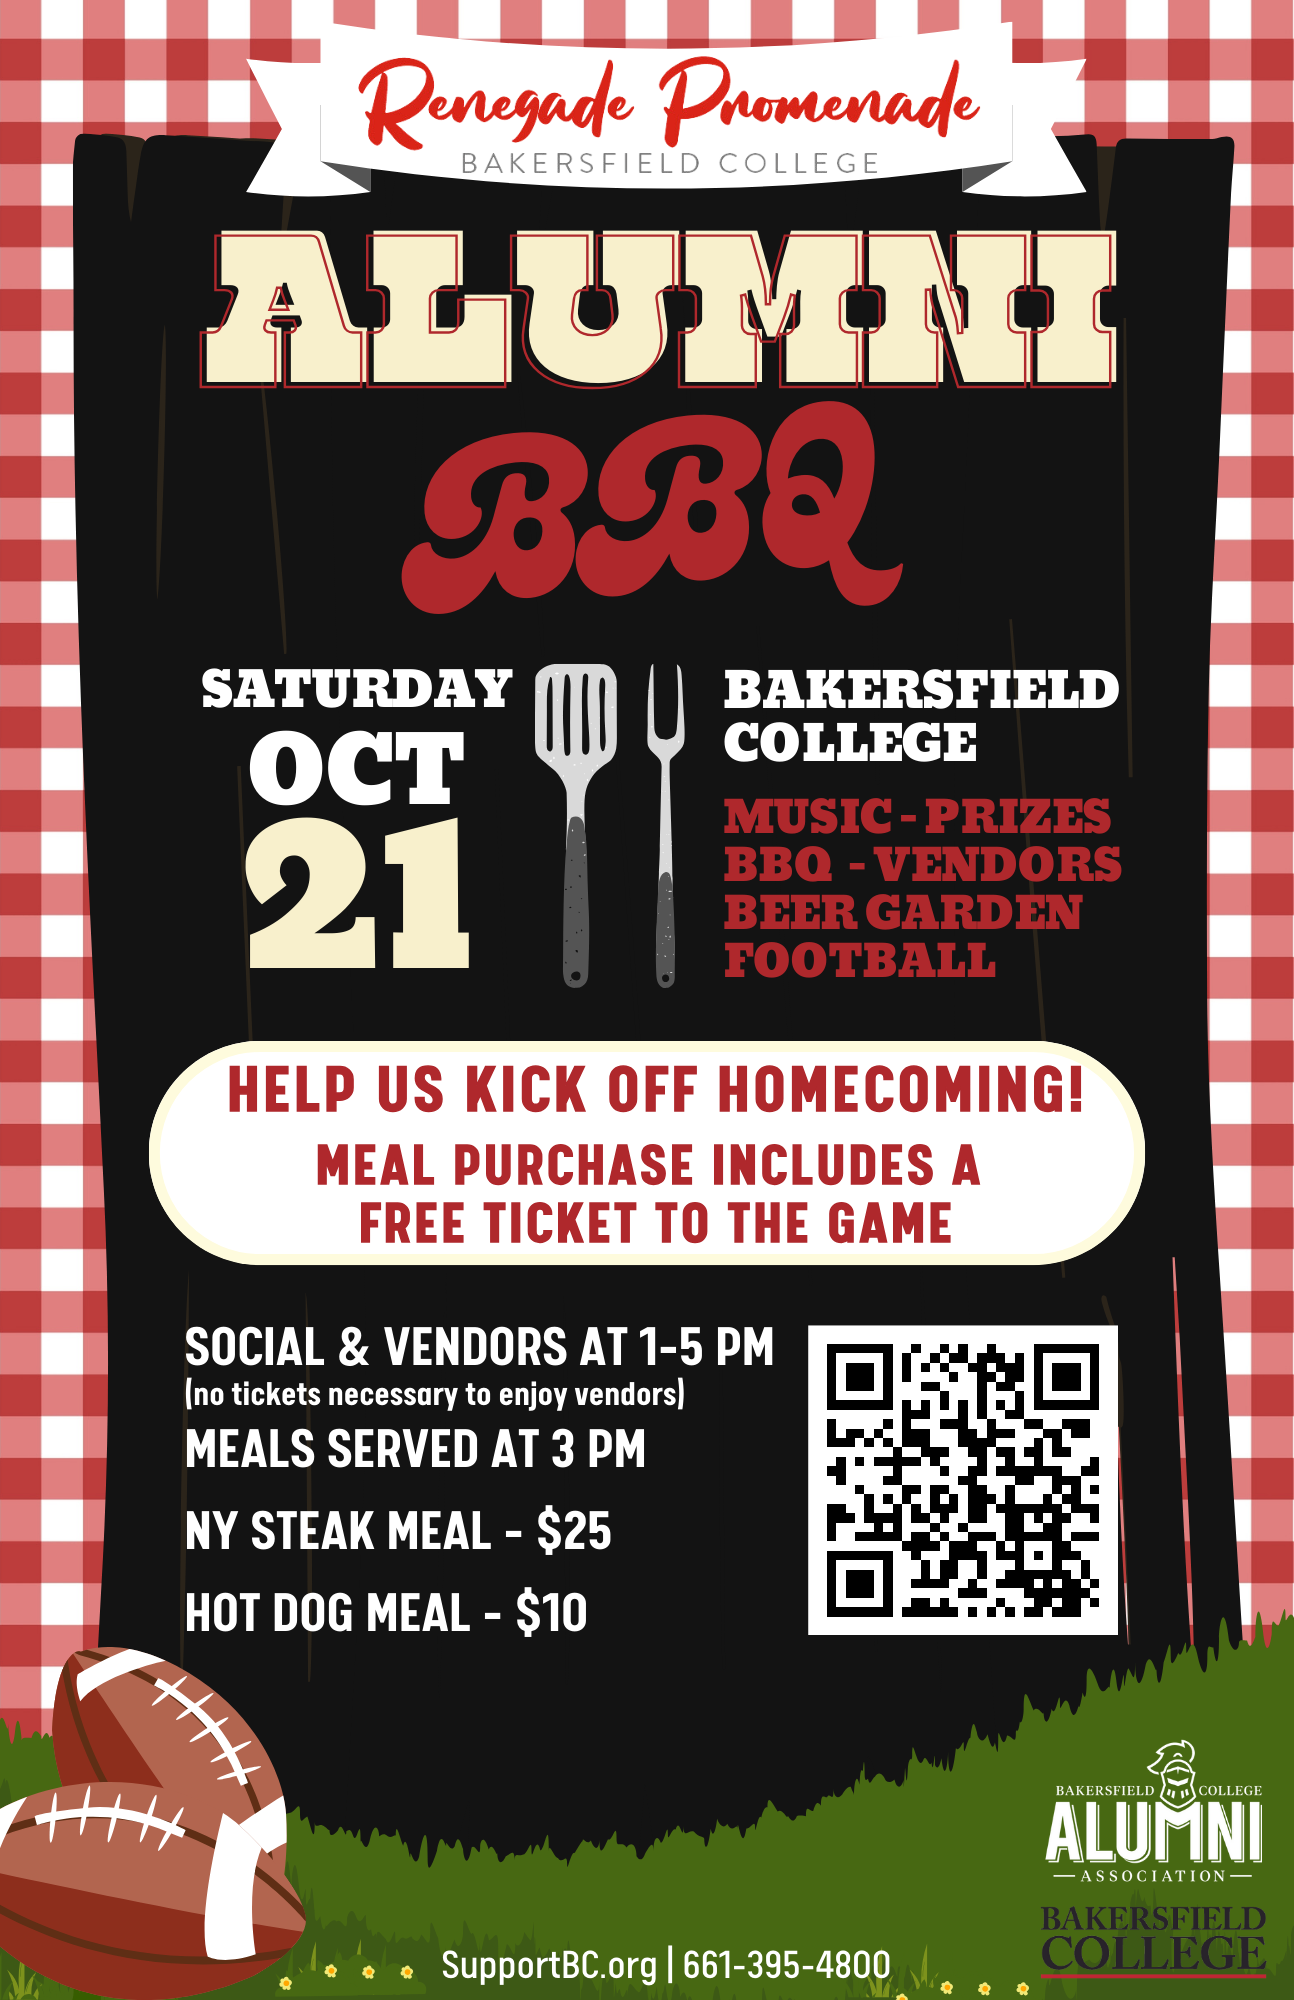 Renegade Promenade: Allumni BBQ on Saturday, October 21 at Bakersfield College. There will be music, prizes, bbq, vendors, and beer garden. Meal purchase includes a free ticket to the homecoming game. Social & vendors is at 1-5 pm, meals are served at 3 pm. NY Steak meal is $25. Hot dog meal is $10.